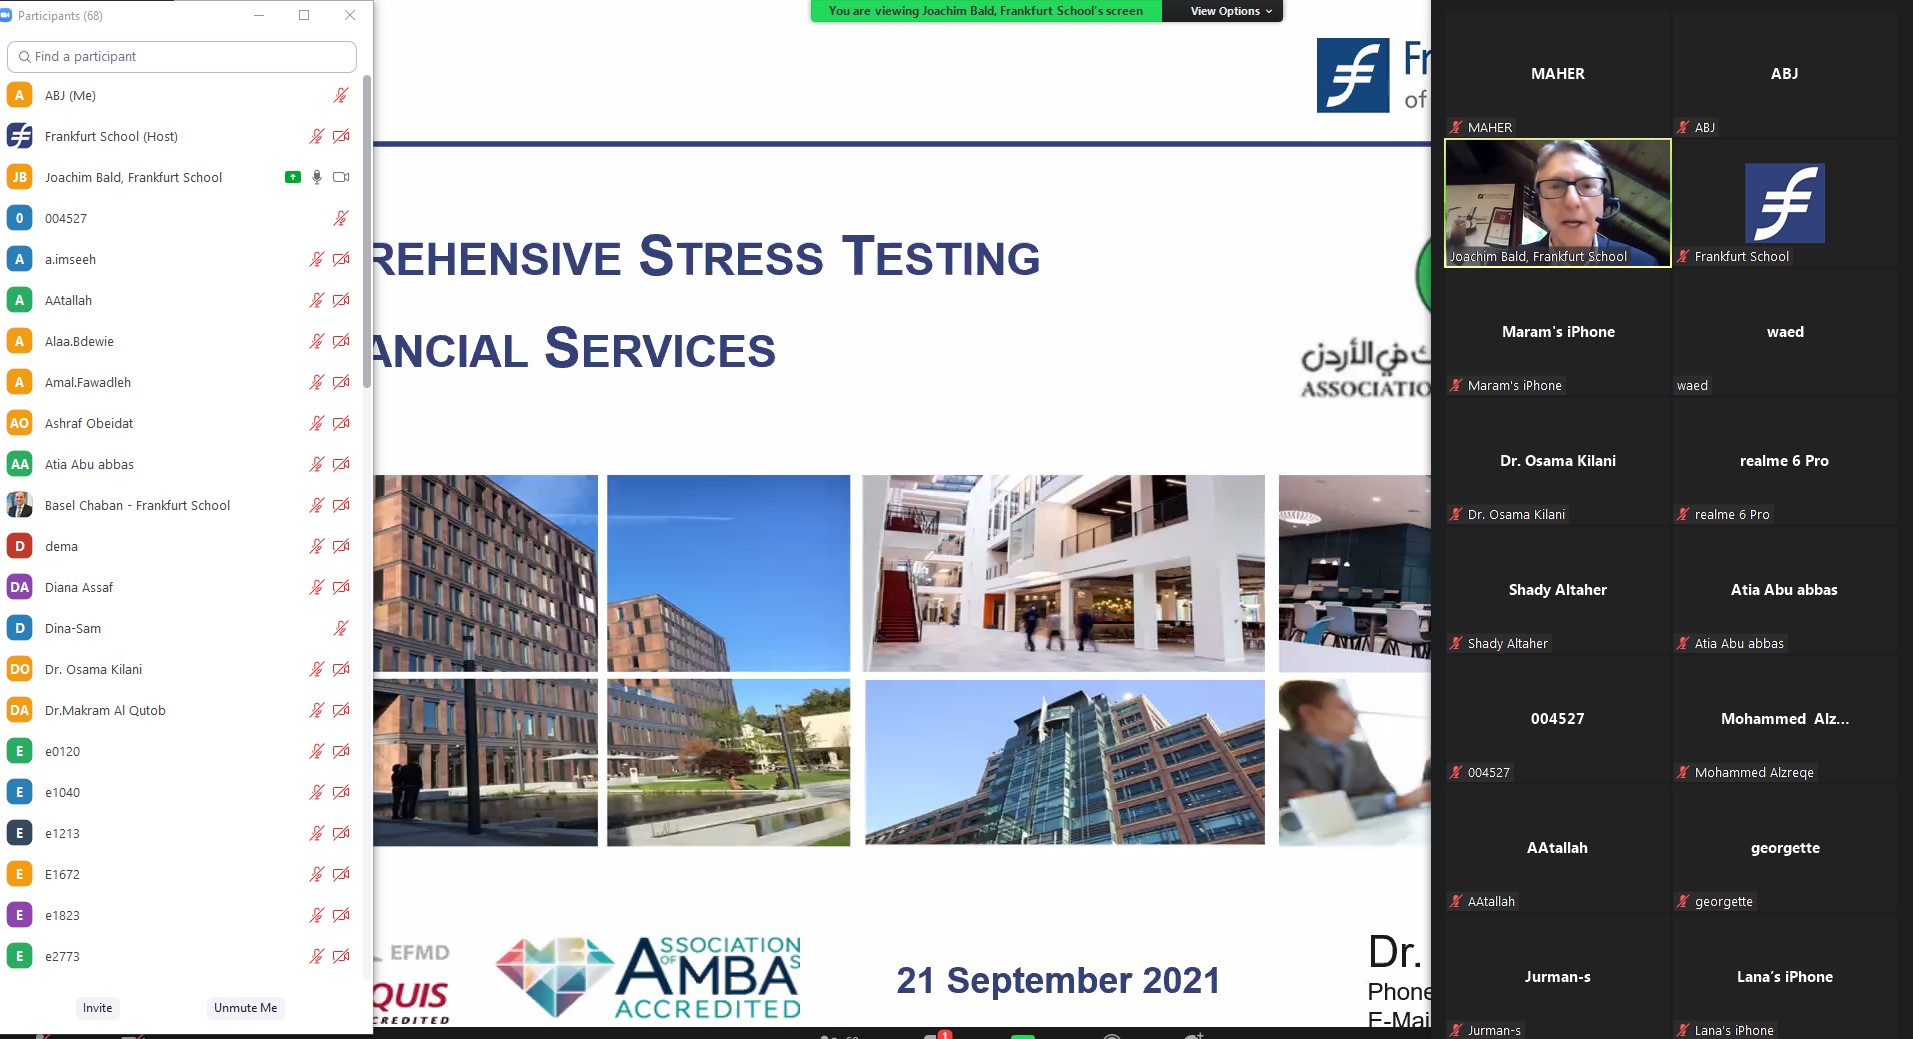 Association of Banks in Jordan holds a workshop on “Comprehensive Stress Tests” in cooperation with the Frankfurt School of Finance and Management